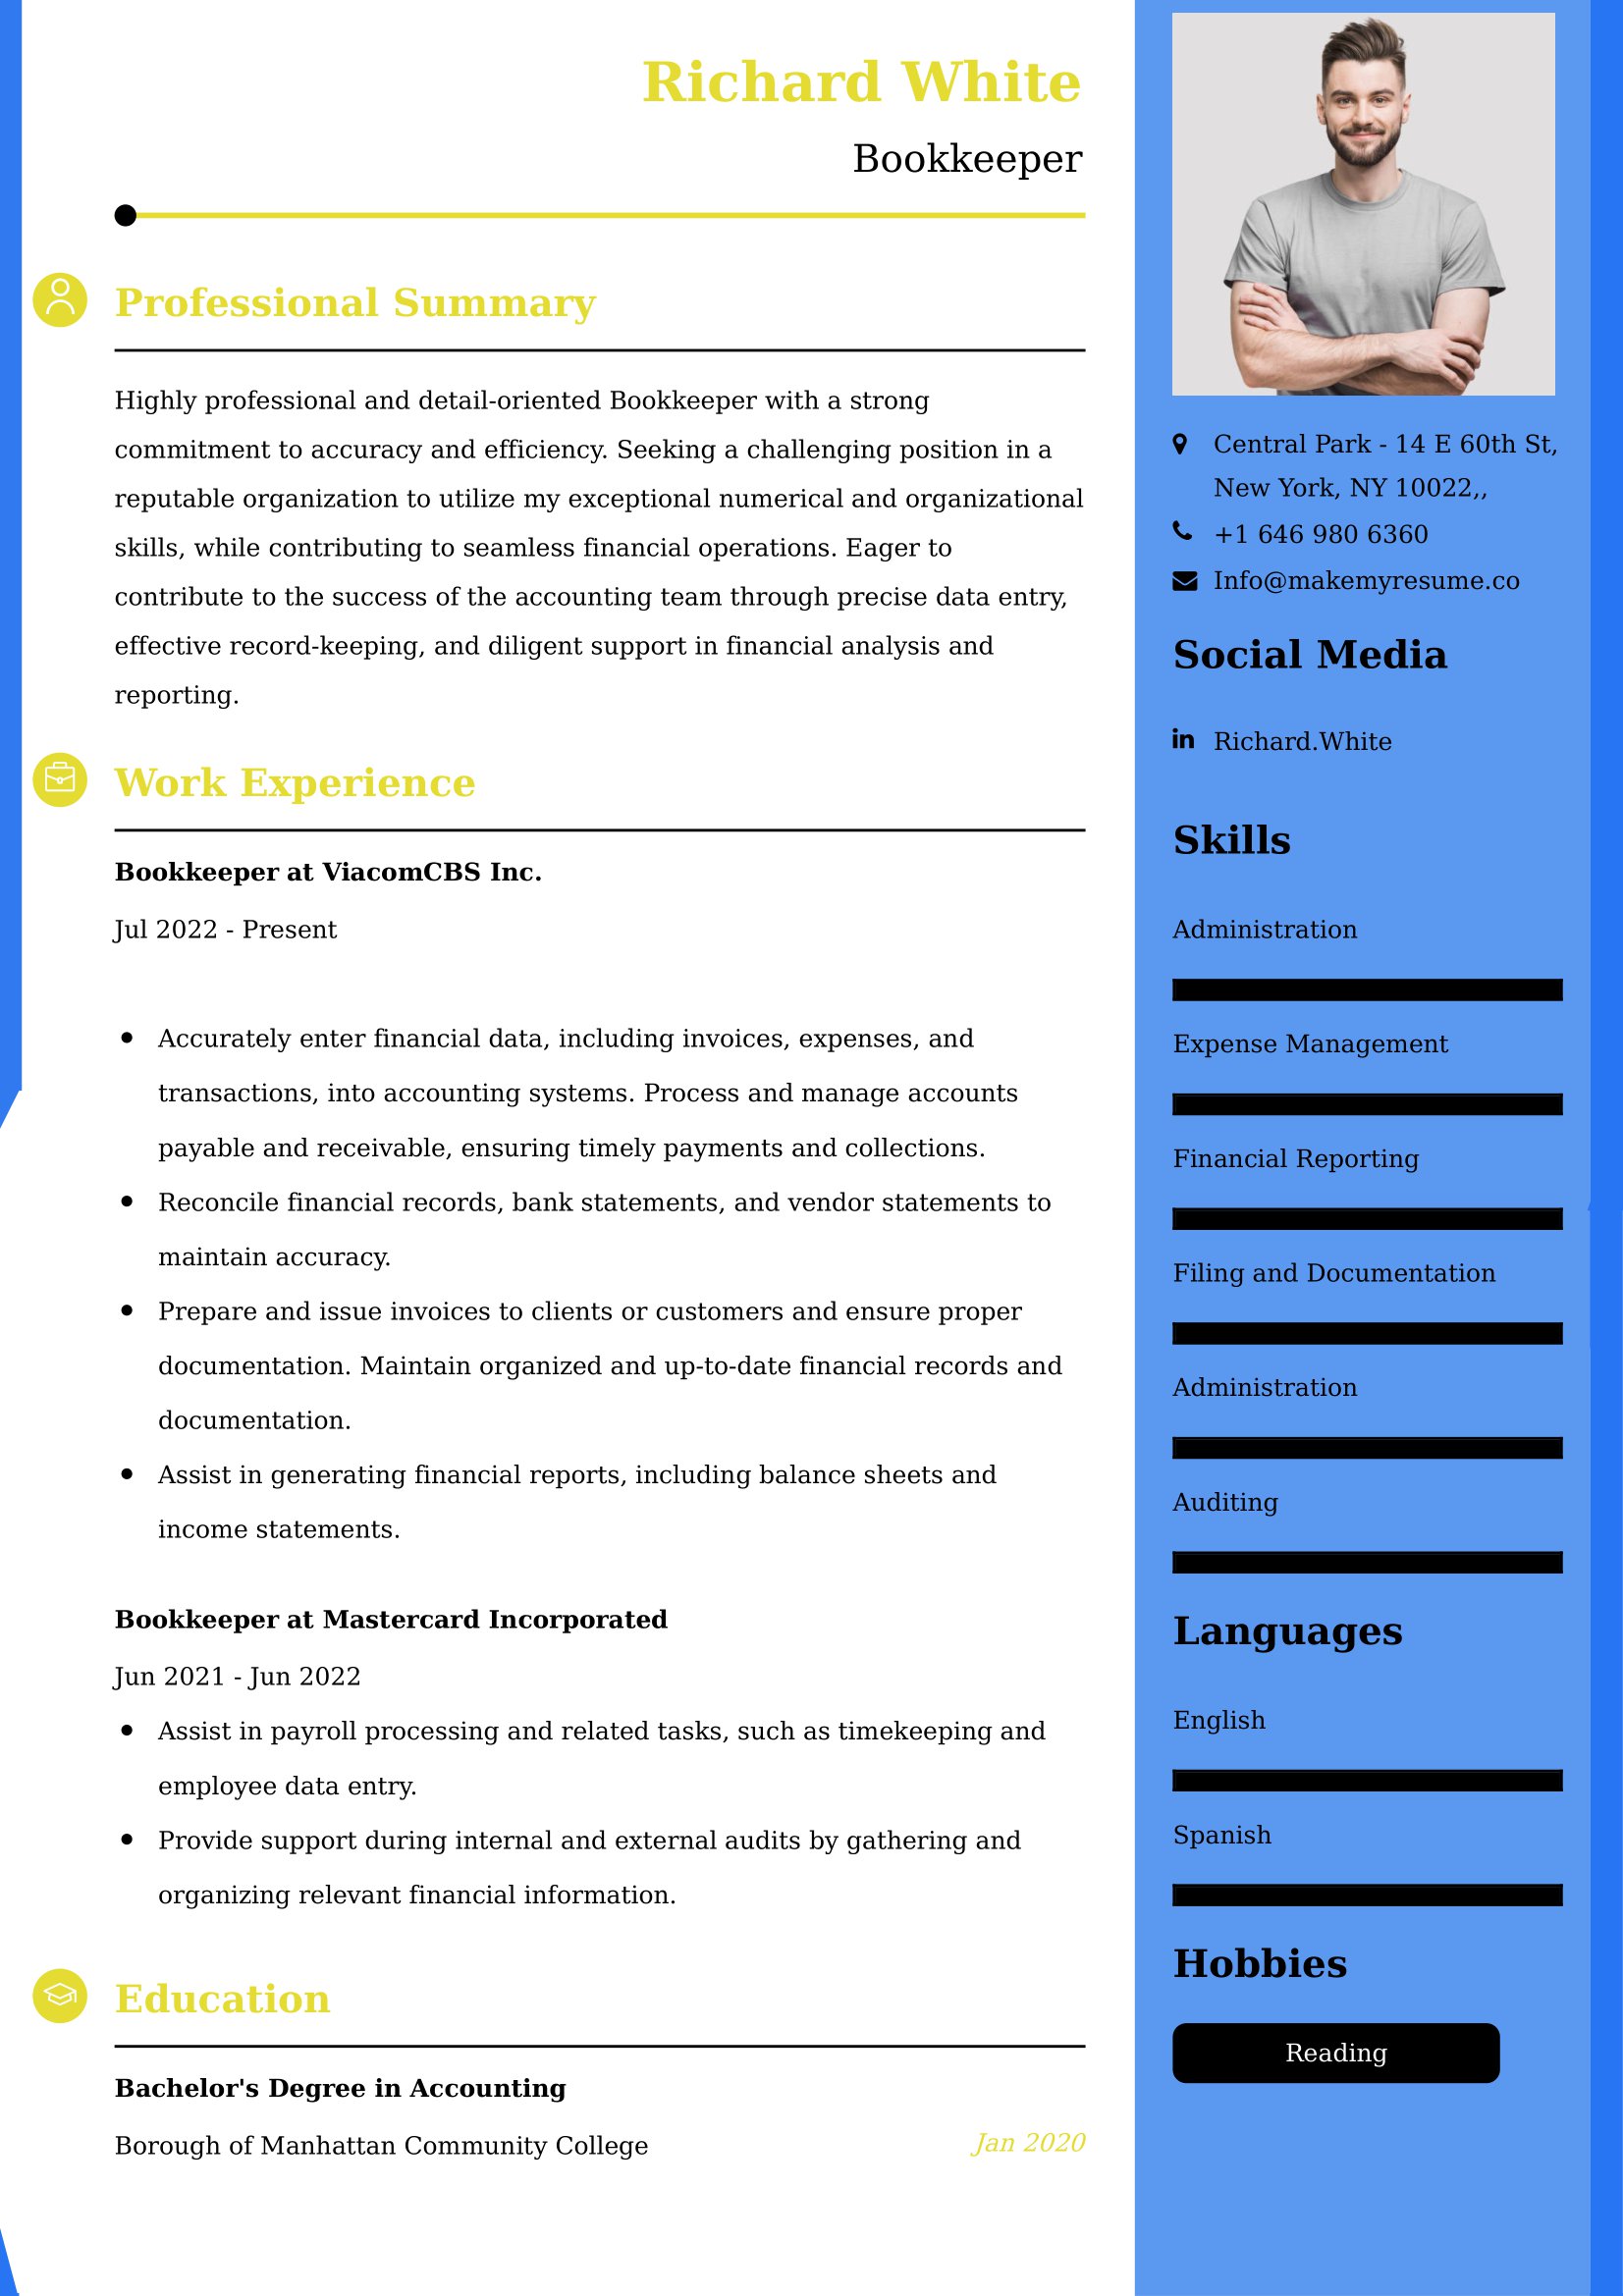 Bookkeeper Resume Examples - UK Format, Latest Template.